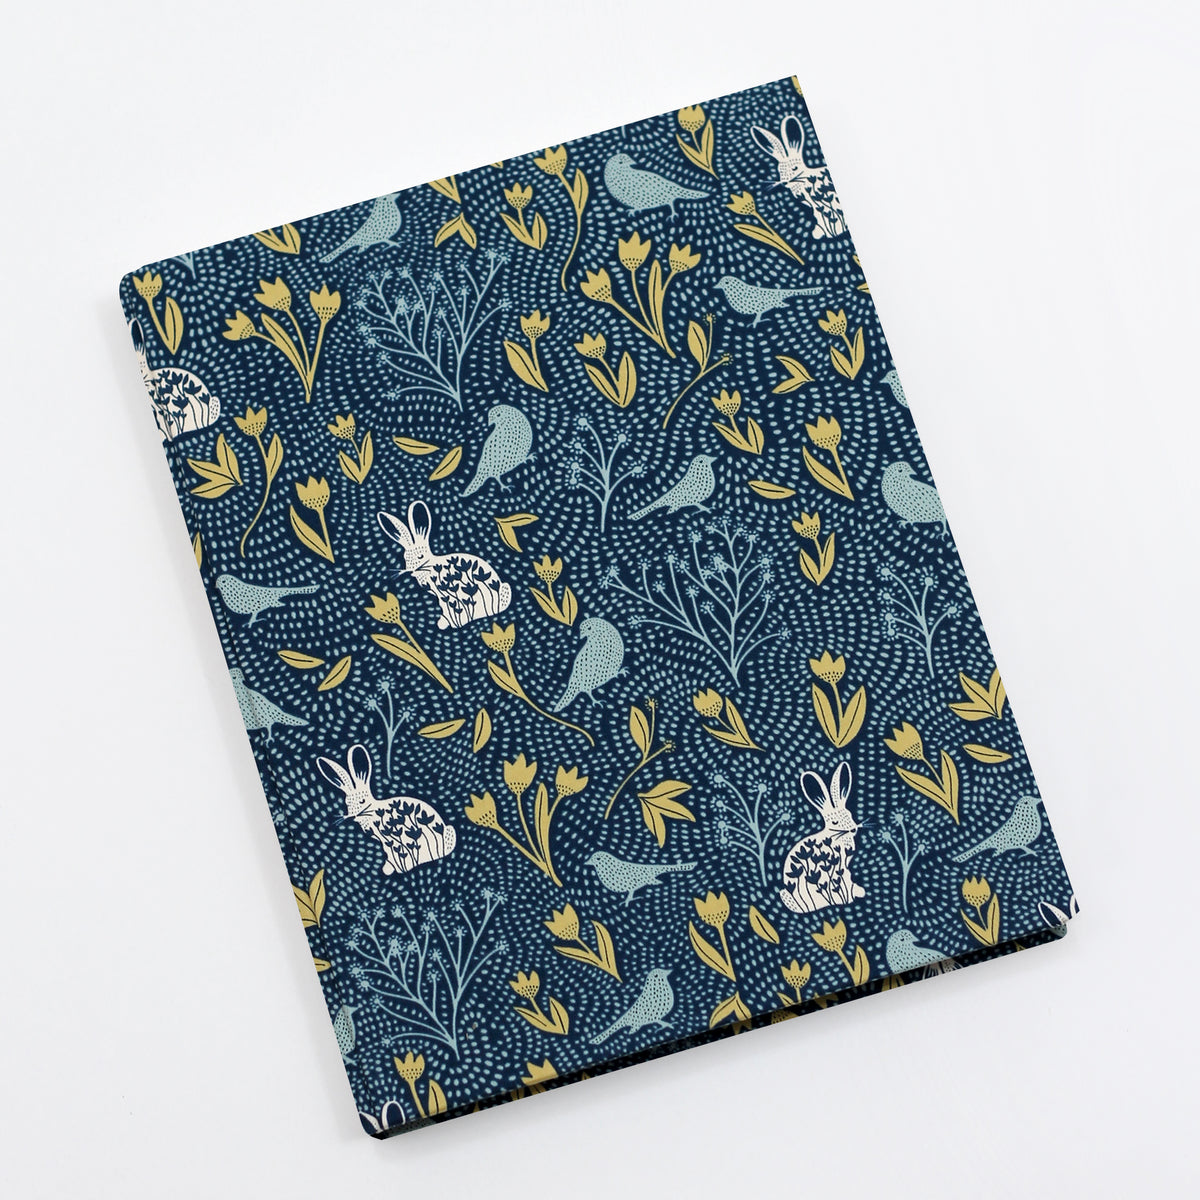 Large 8 x 10 Blank Page Journal | Limited Edition Cover: Nesting Season